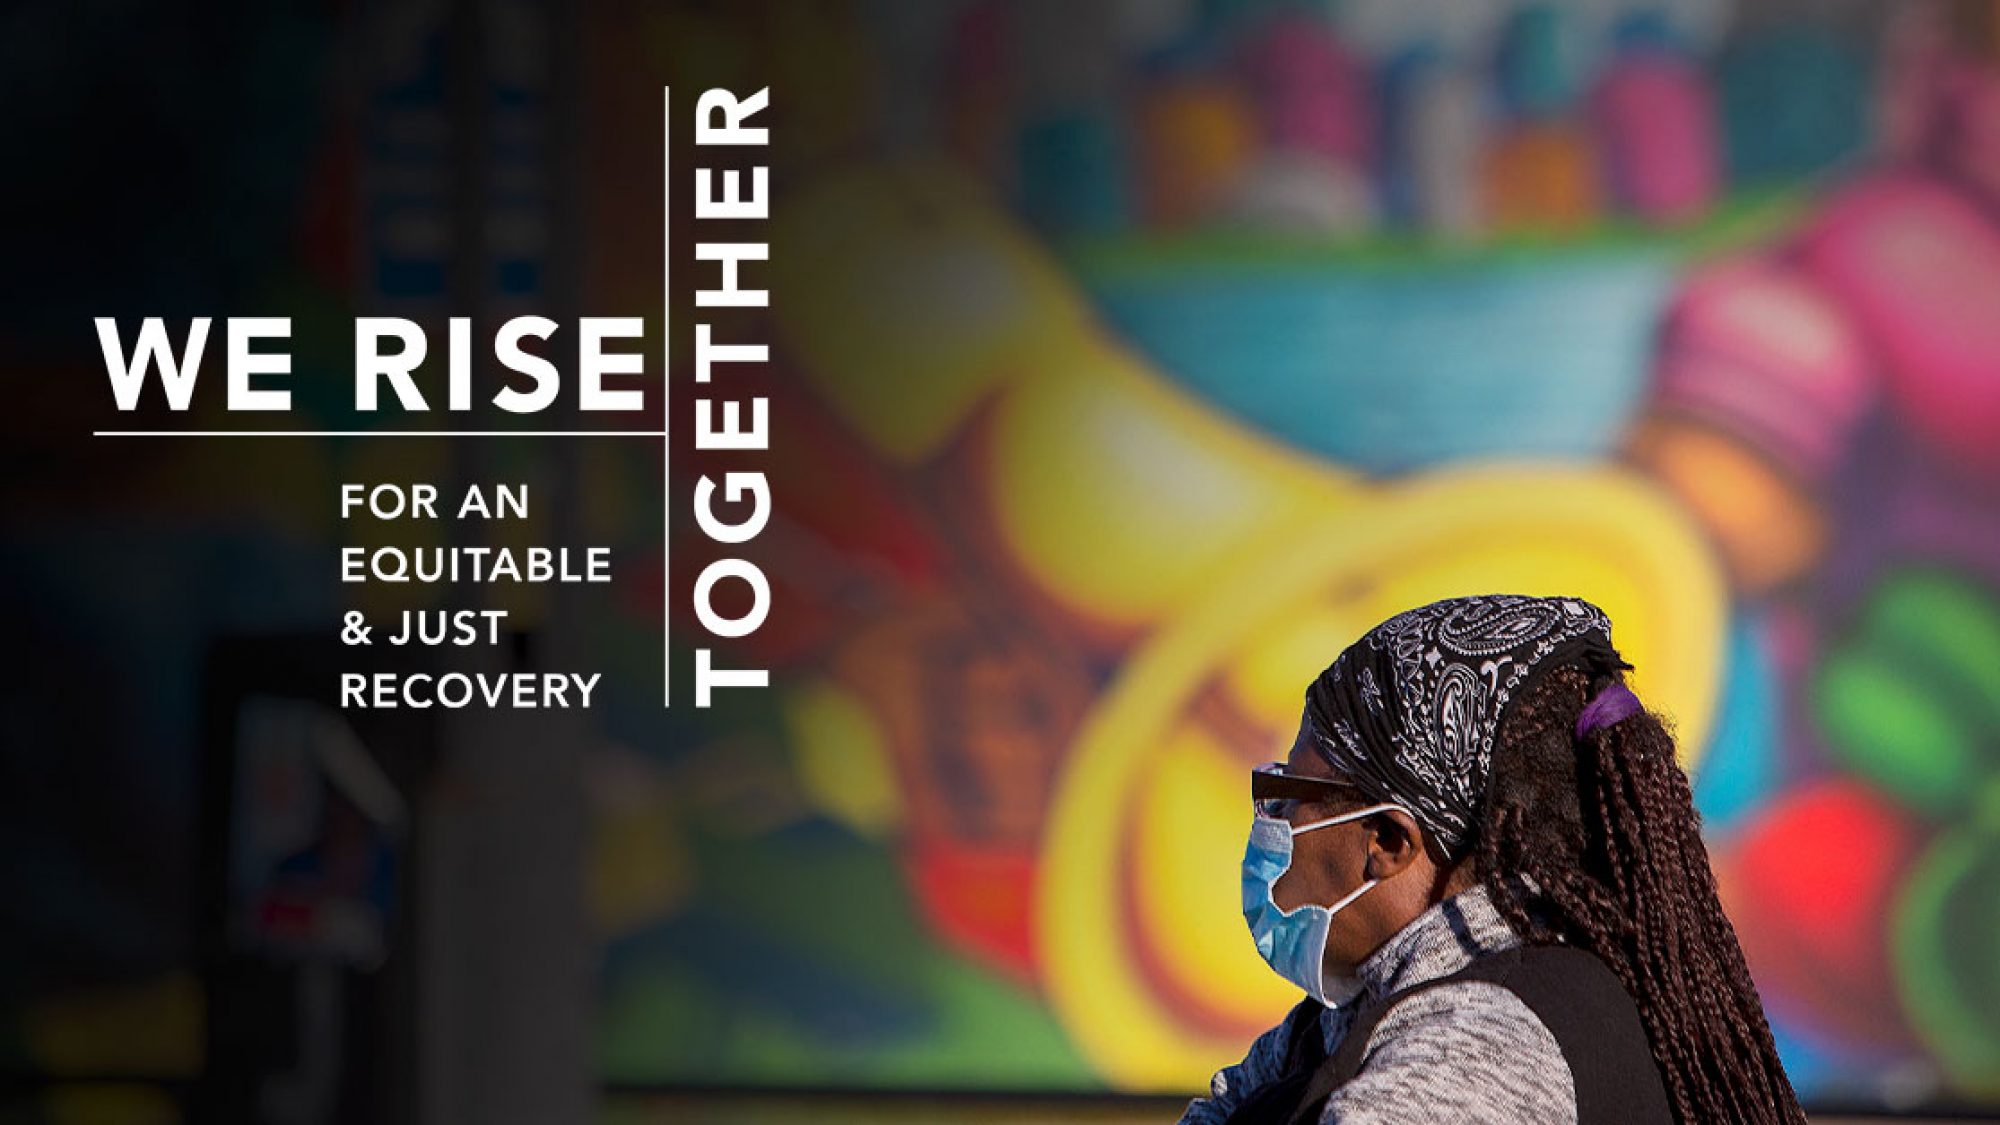 Black woman, masked, in front of a colorful mural. Overlay text says We rise together for an equitable and just recovery.